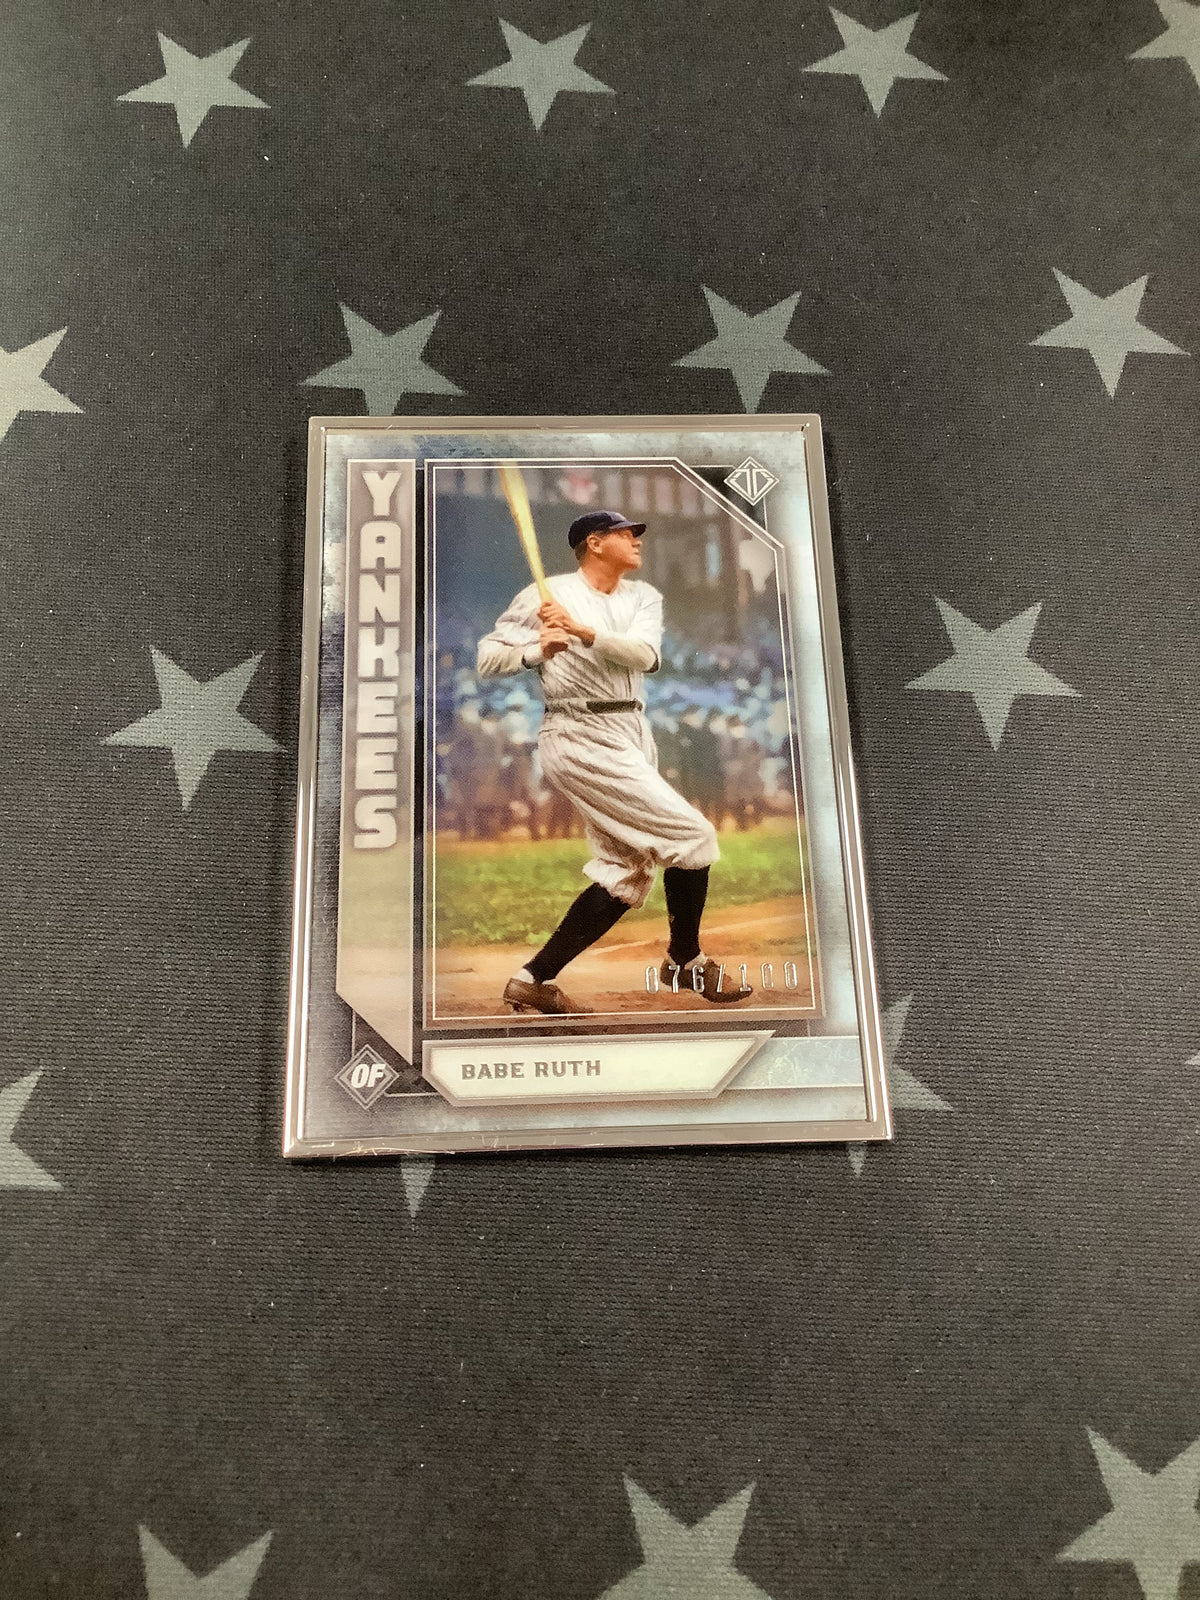 2019 BABE RUTH TRANSCENDENT COLLECTION BASEBALL #76/100